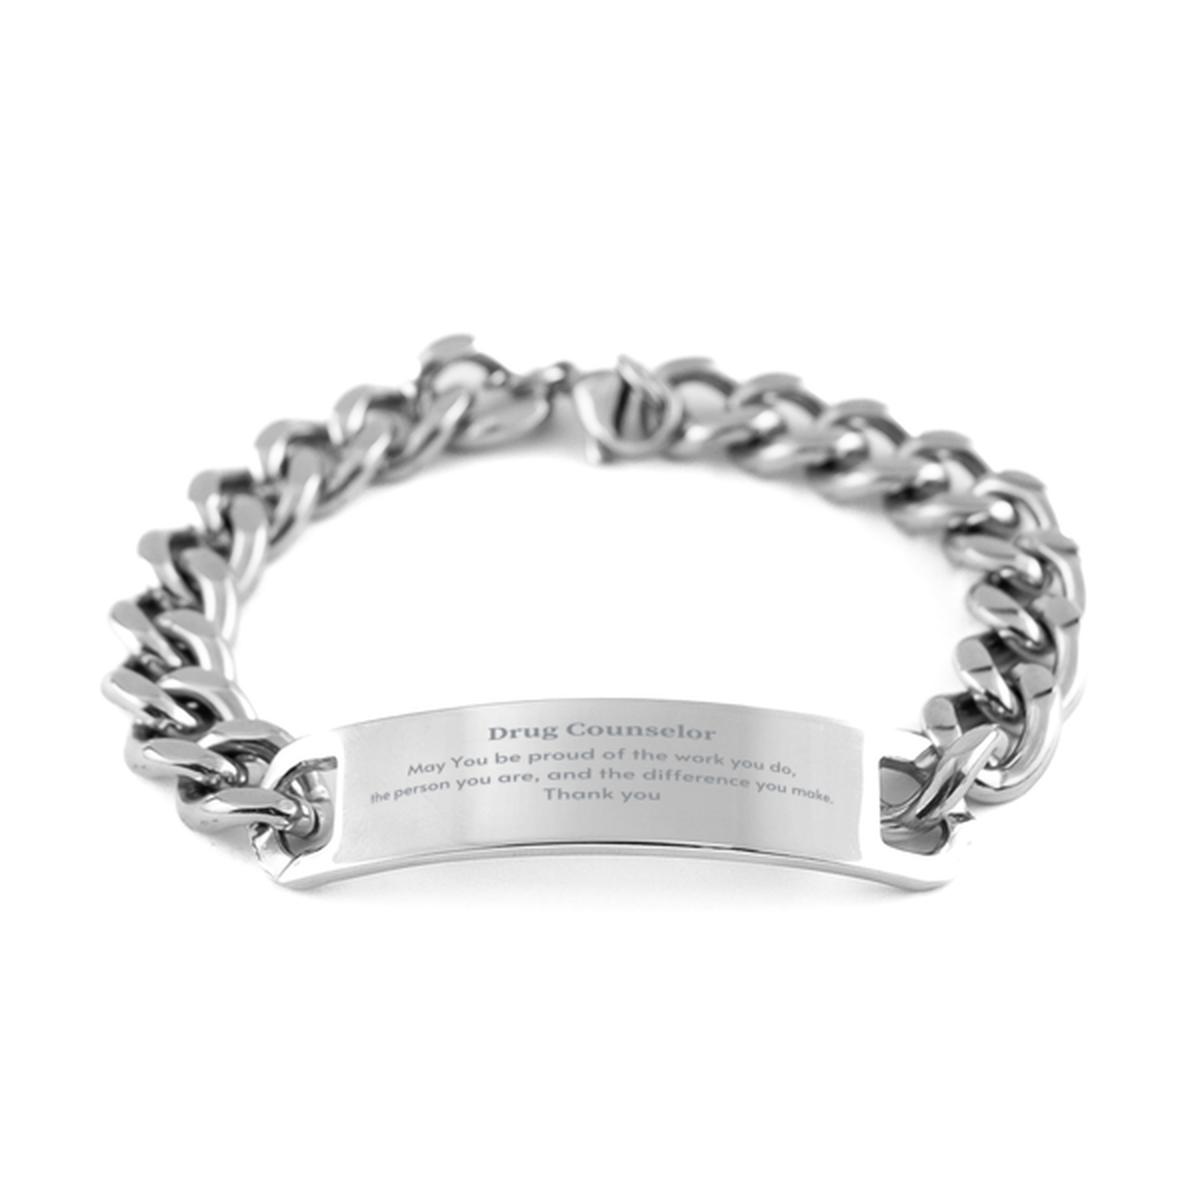 Heartwarming Cuban Chain Stainless Steel Bracelet Retirement Coworkers Gifts for Drug Counselor, Drug Counselor May You be proud of the work you do, the person you are Gifts for Boss Men Women Friends